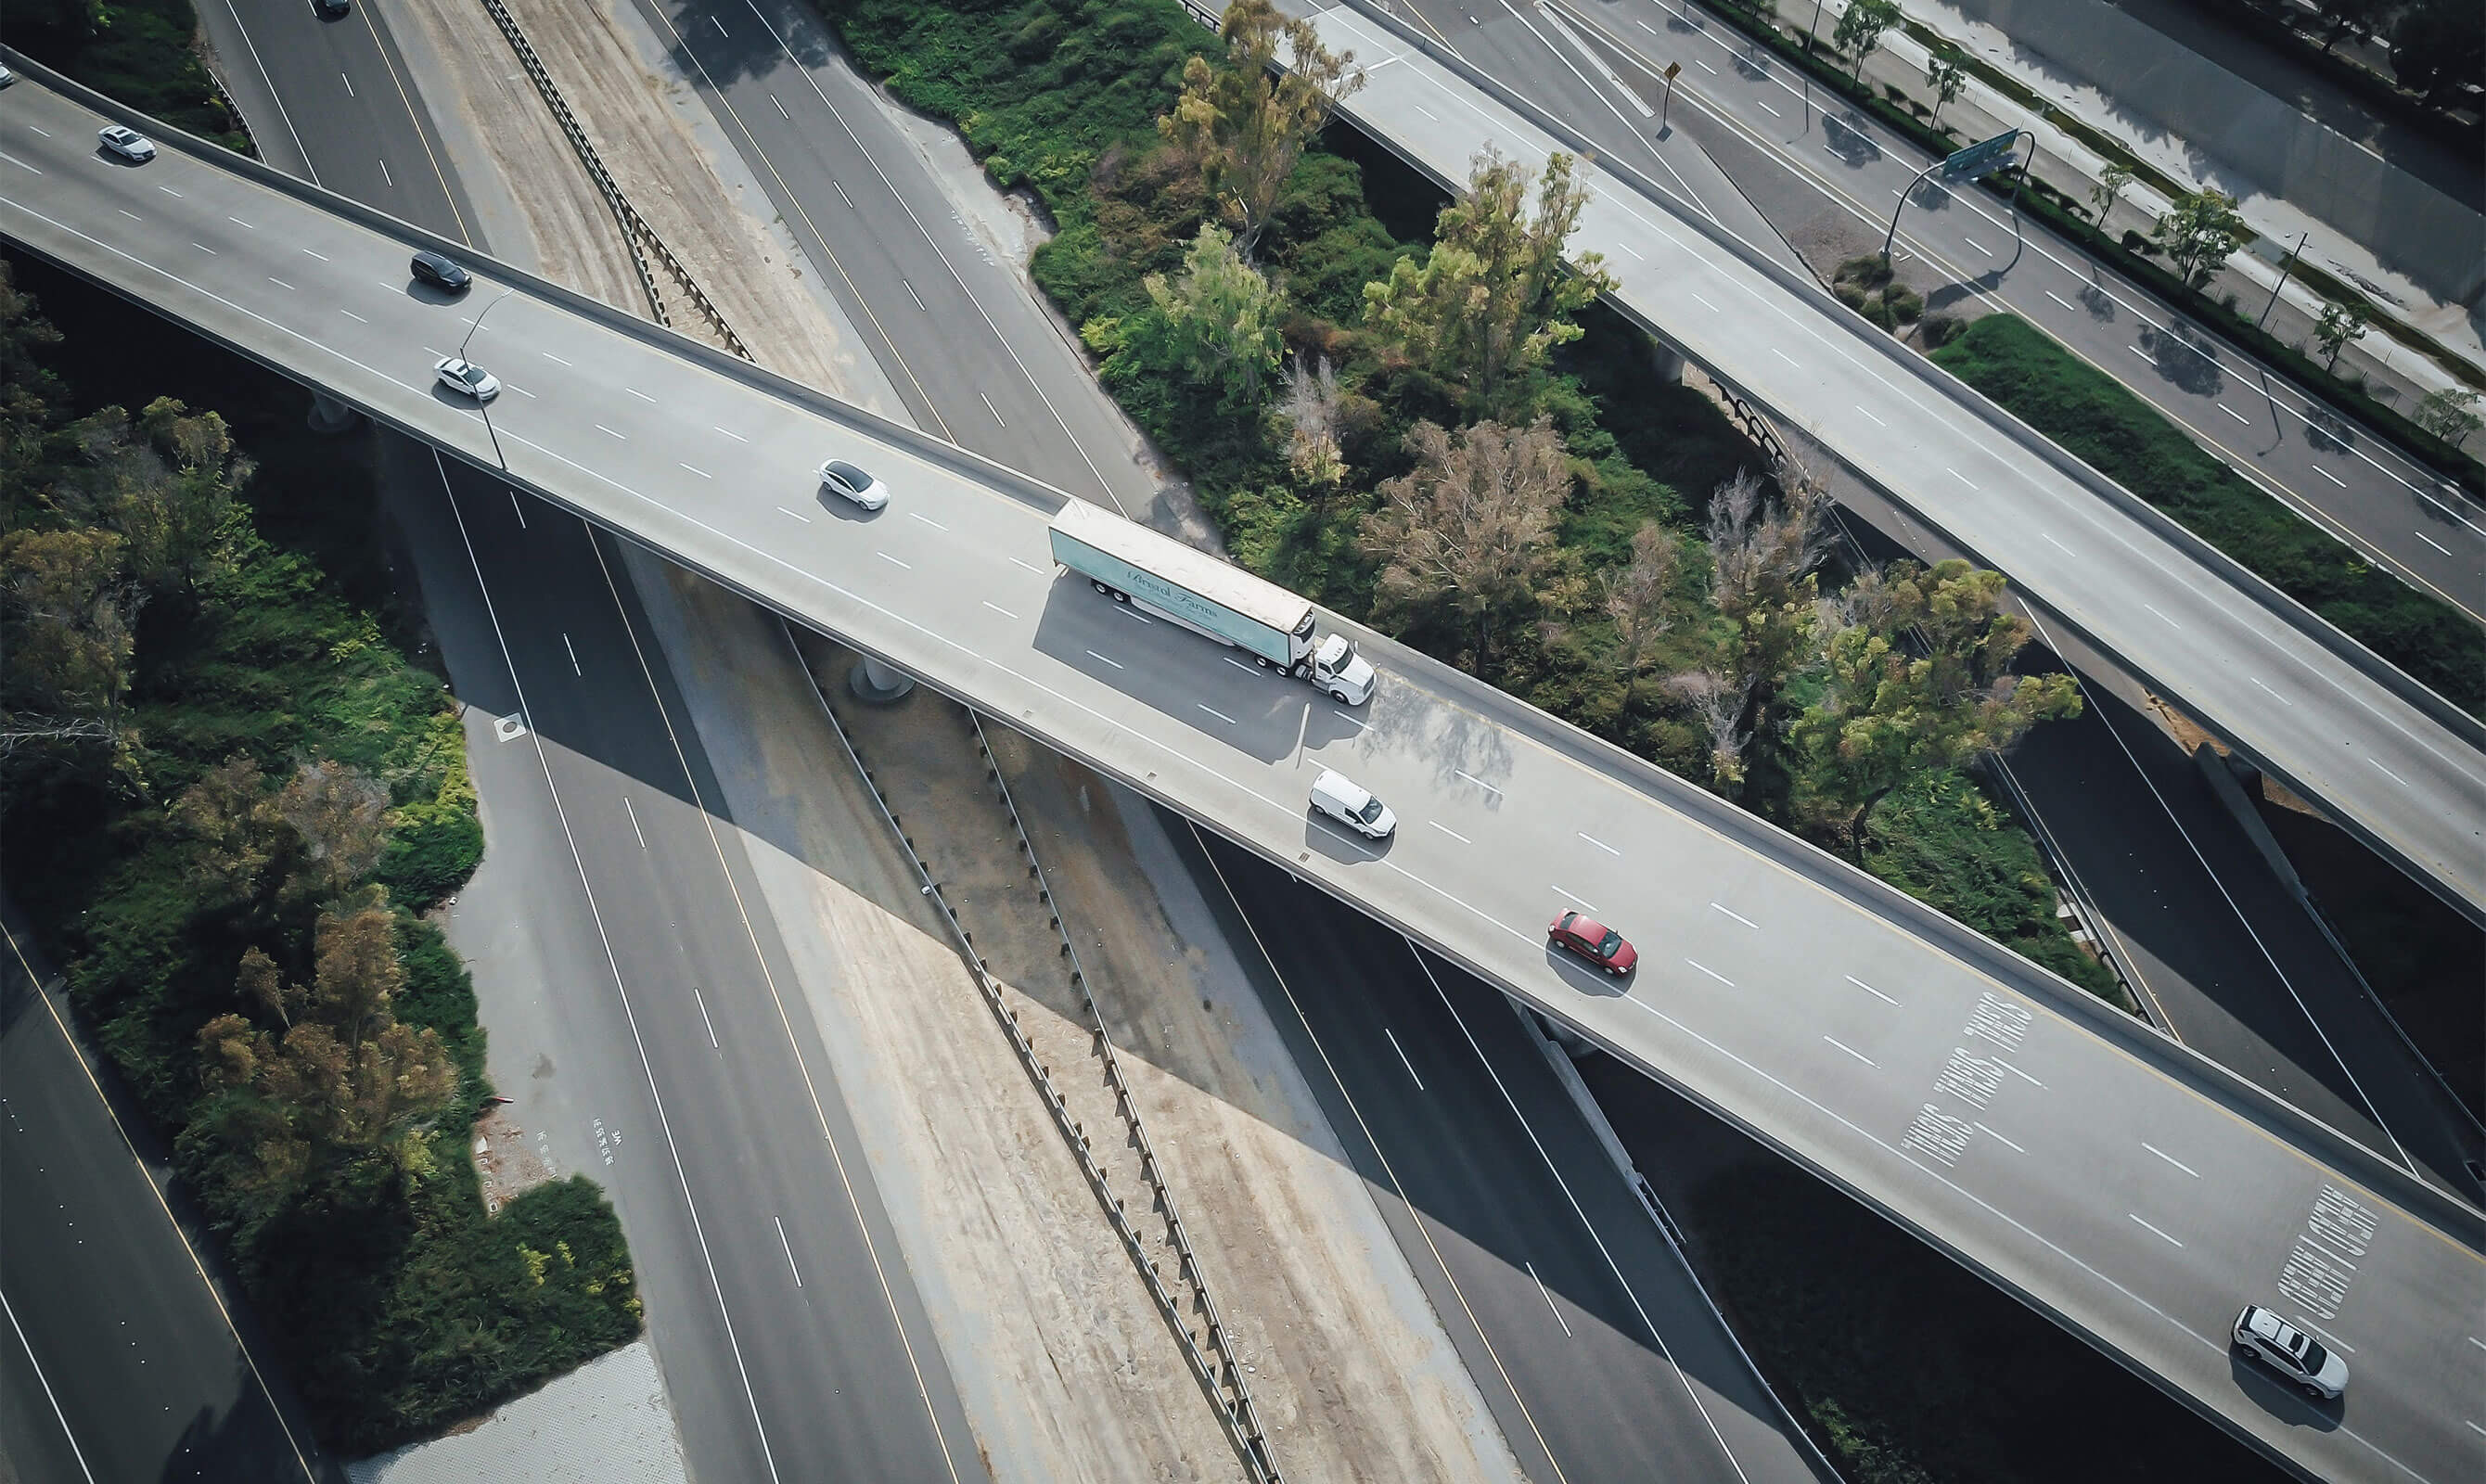 Aerial view of a multi-lane highway with vehicles, emphasizing potential for autonomous driving data collection